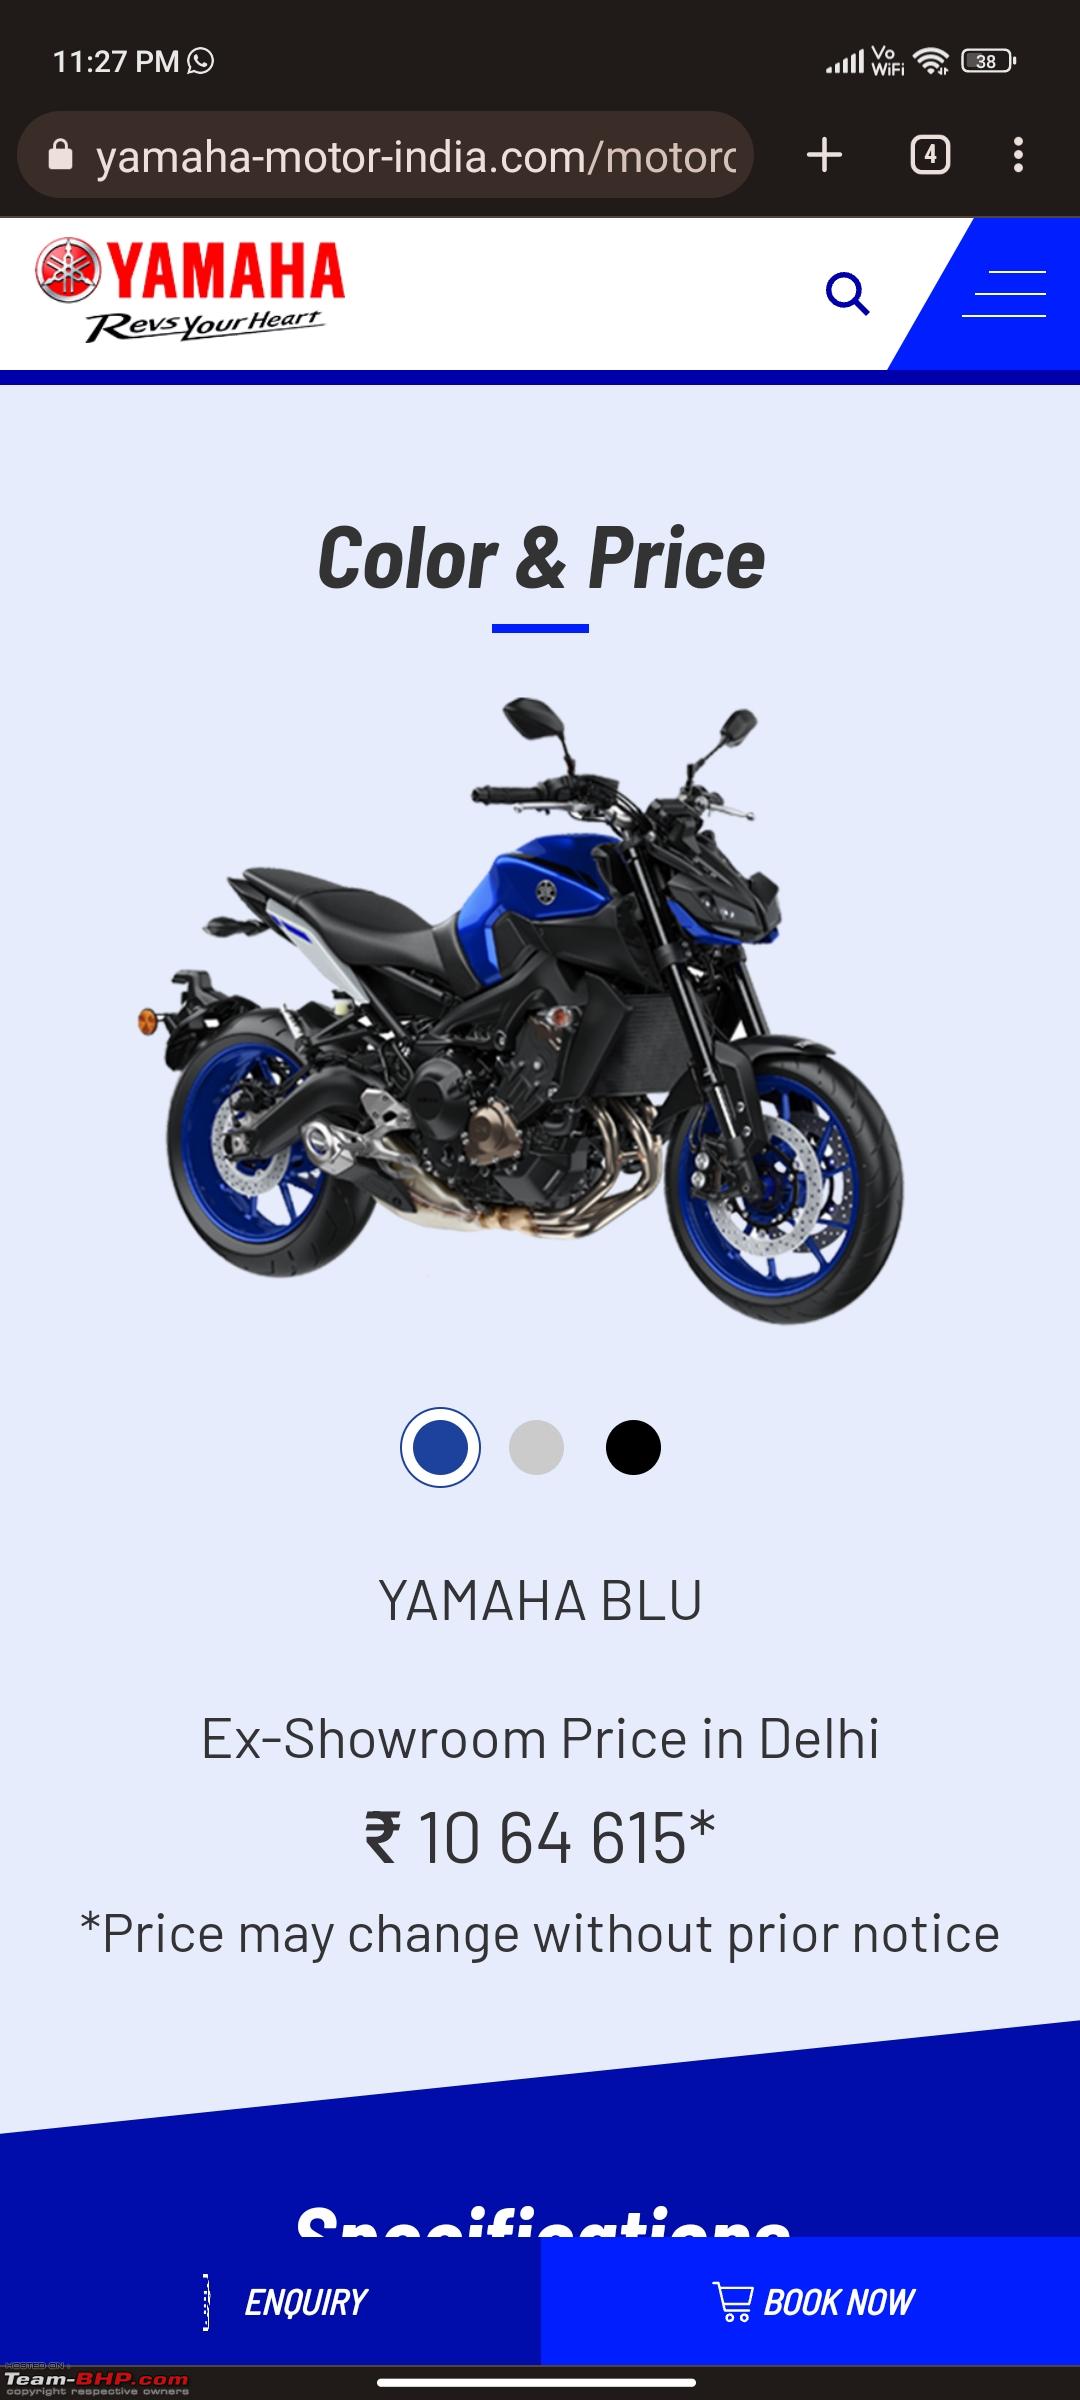 EXCLUSIVE: Yamaha India could launch MT-07, R7 in 2022